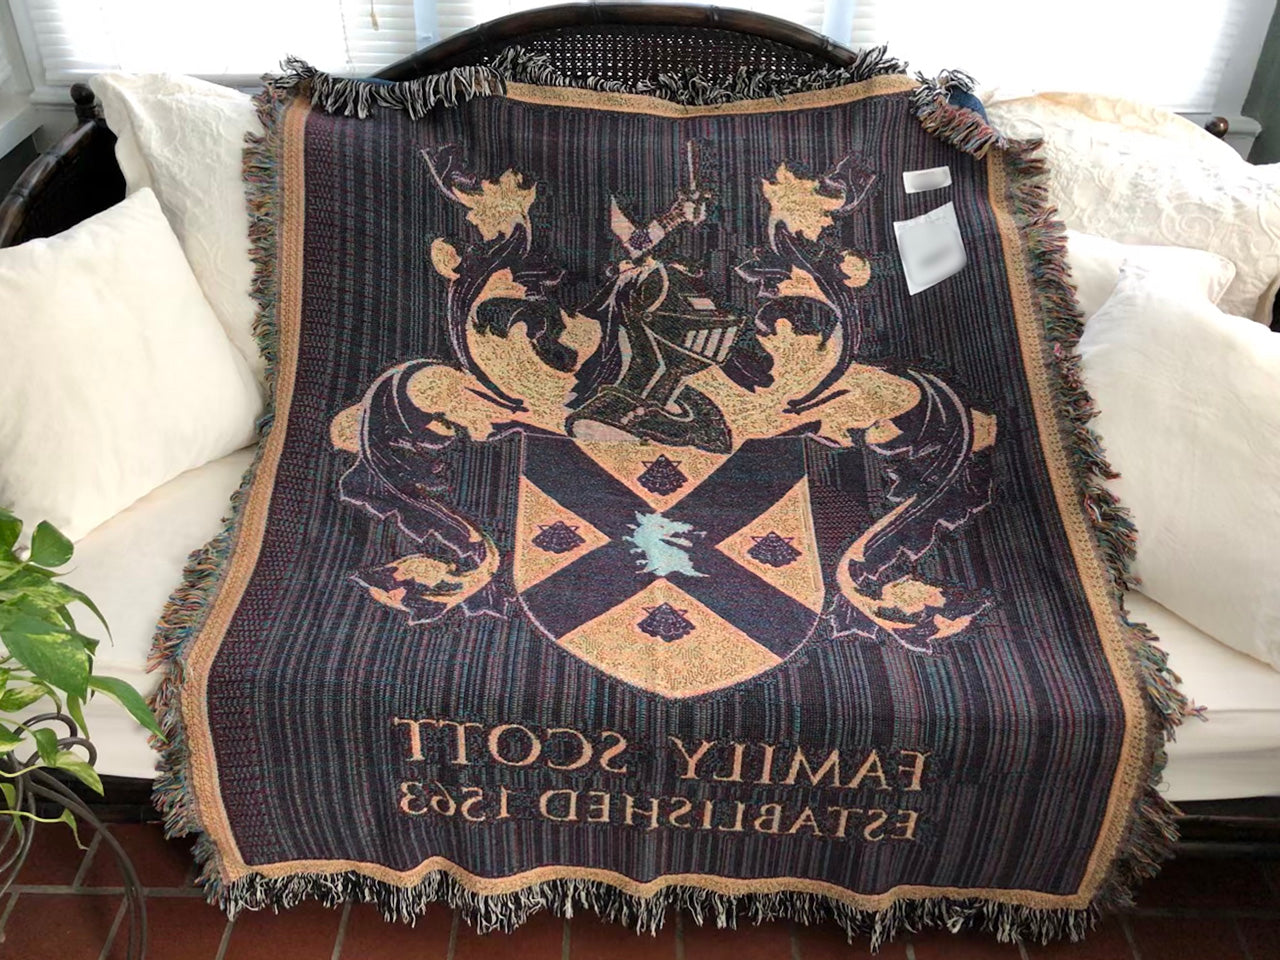 Personalized Family Crest Woven Blanket